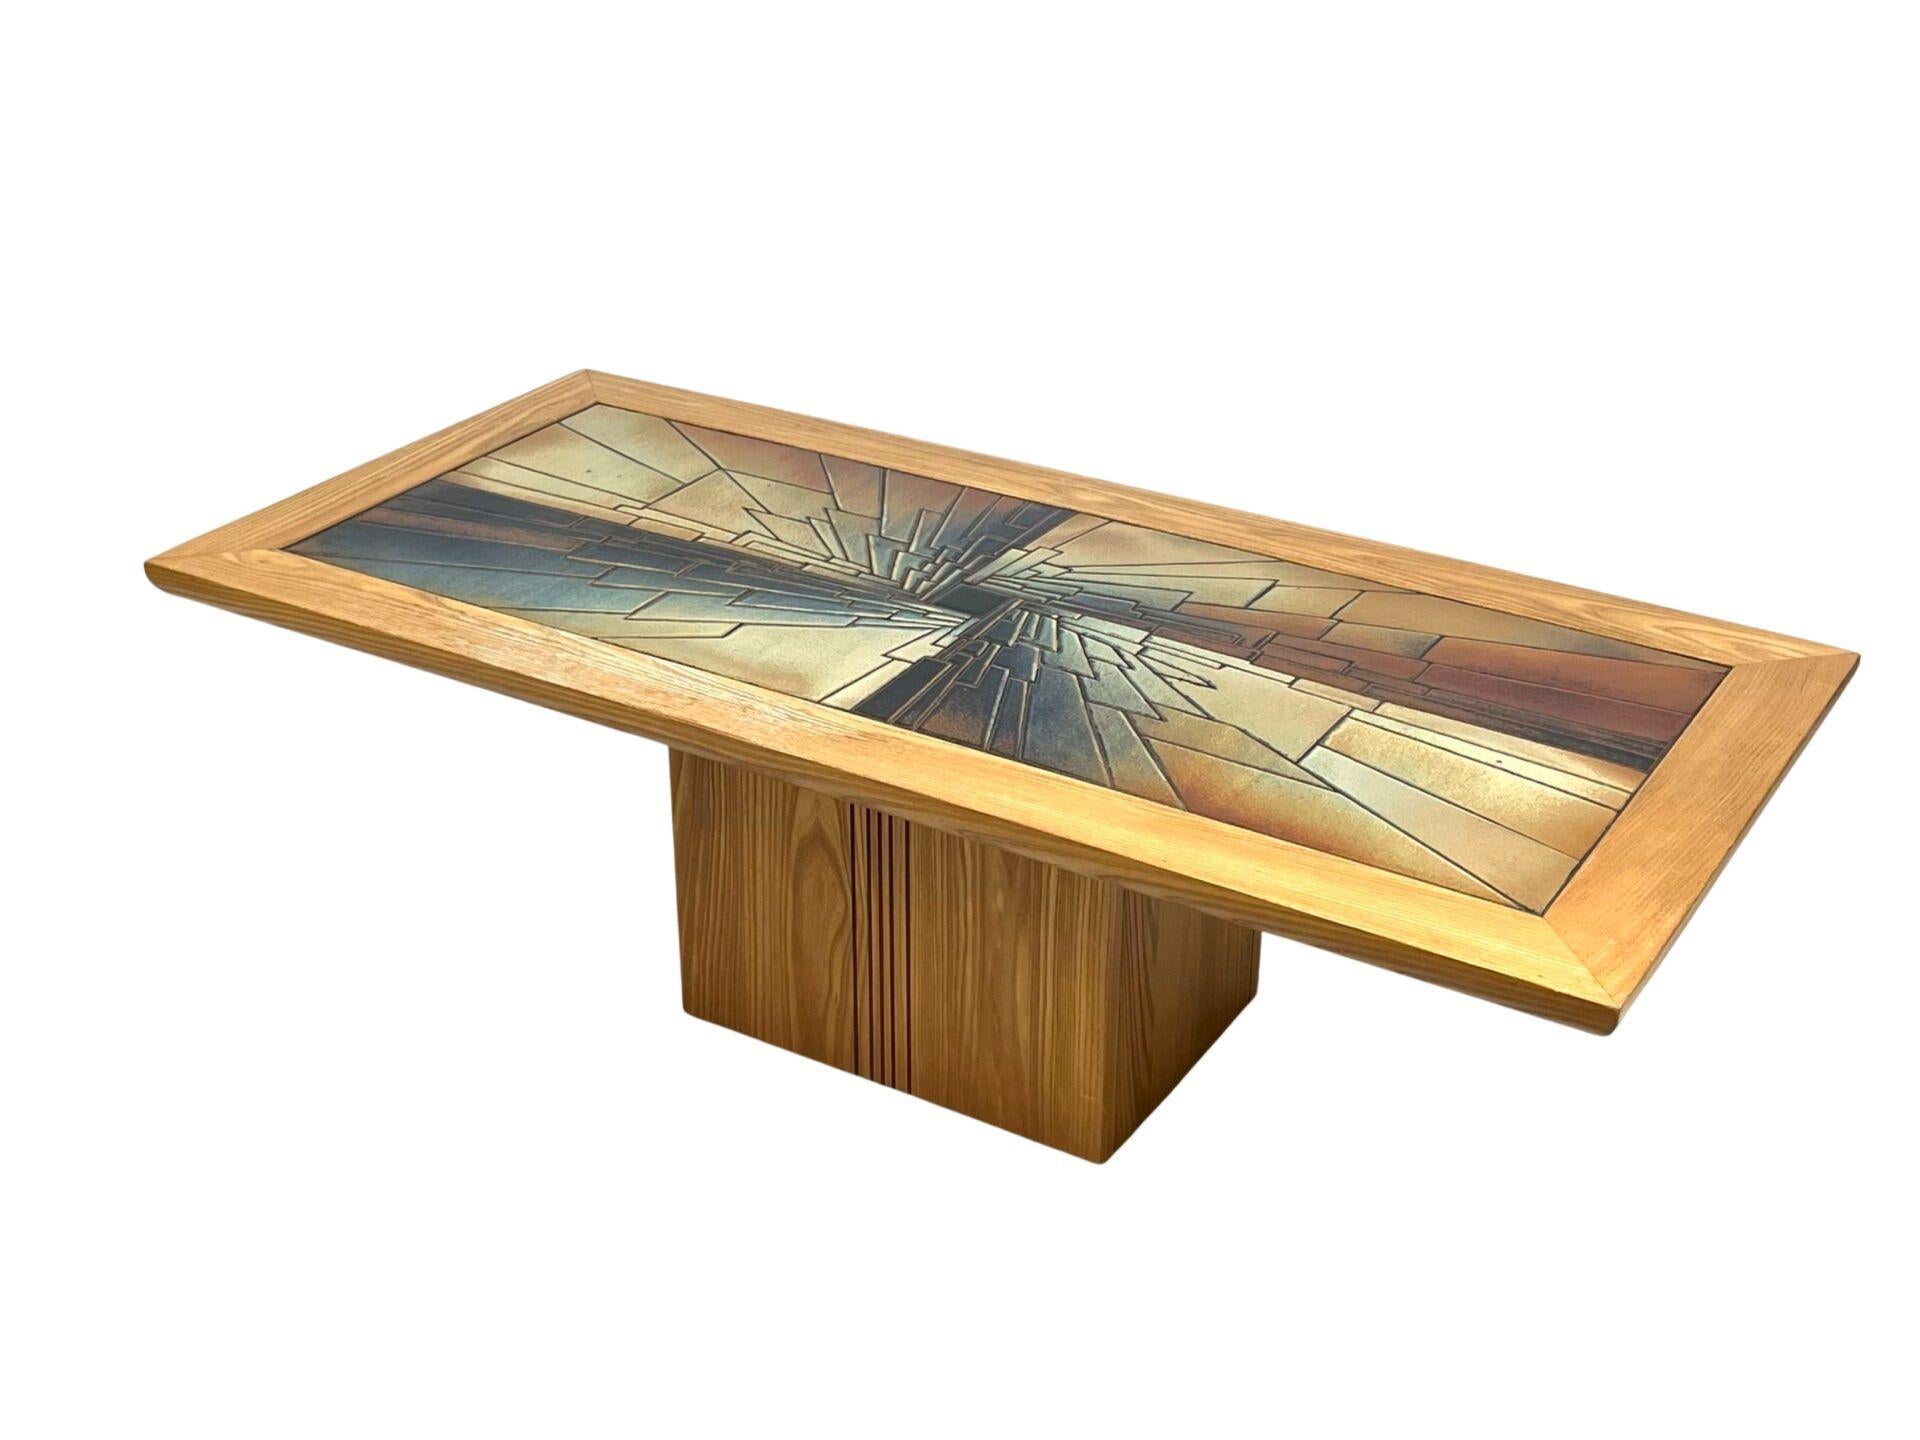 French work, pine coffee table, abstract ceramic tile top, circa 1970

Height 40 x Width 131 x Depth 60 cm

Good original condition 